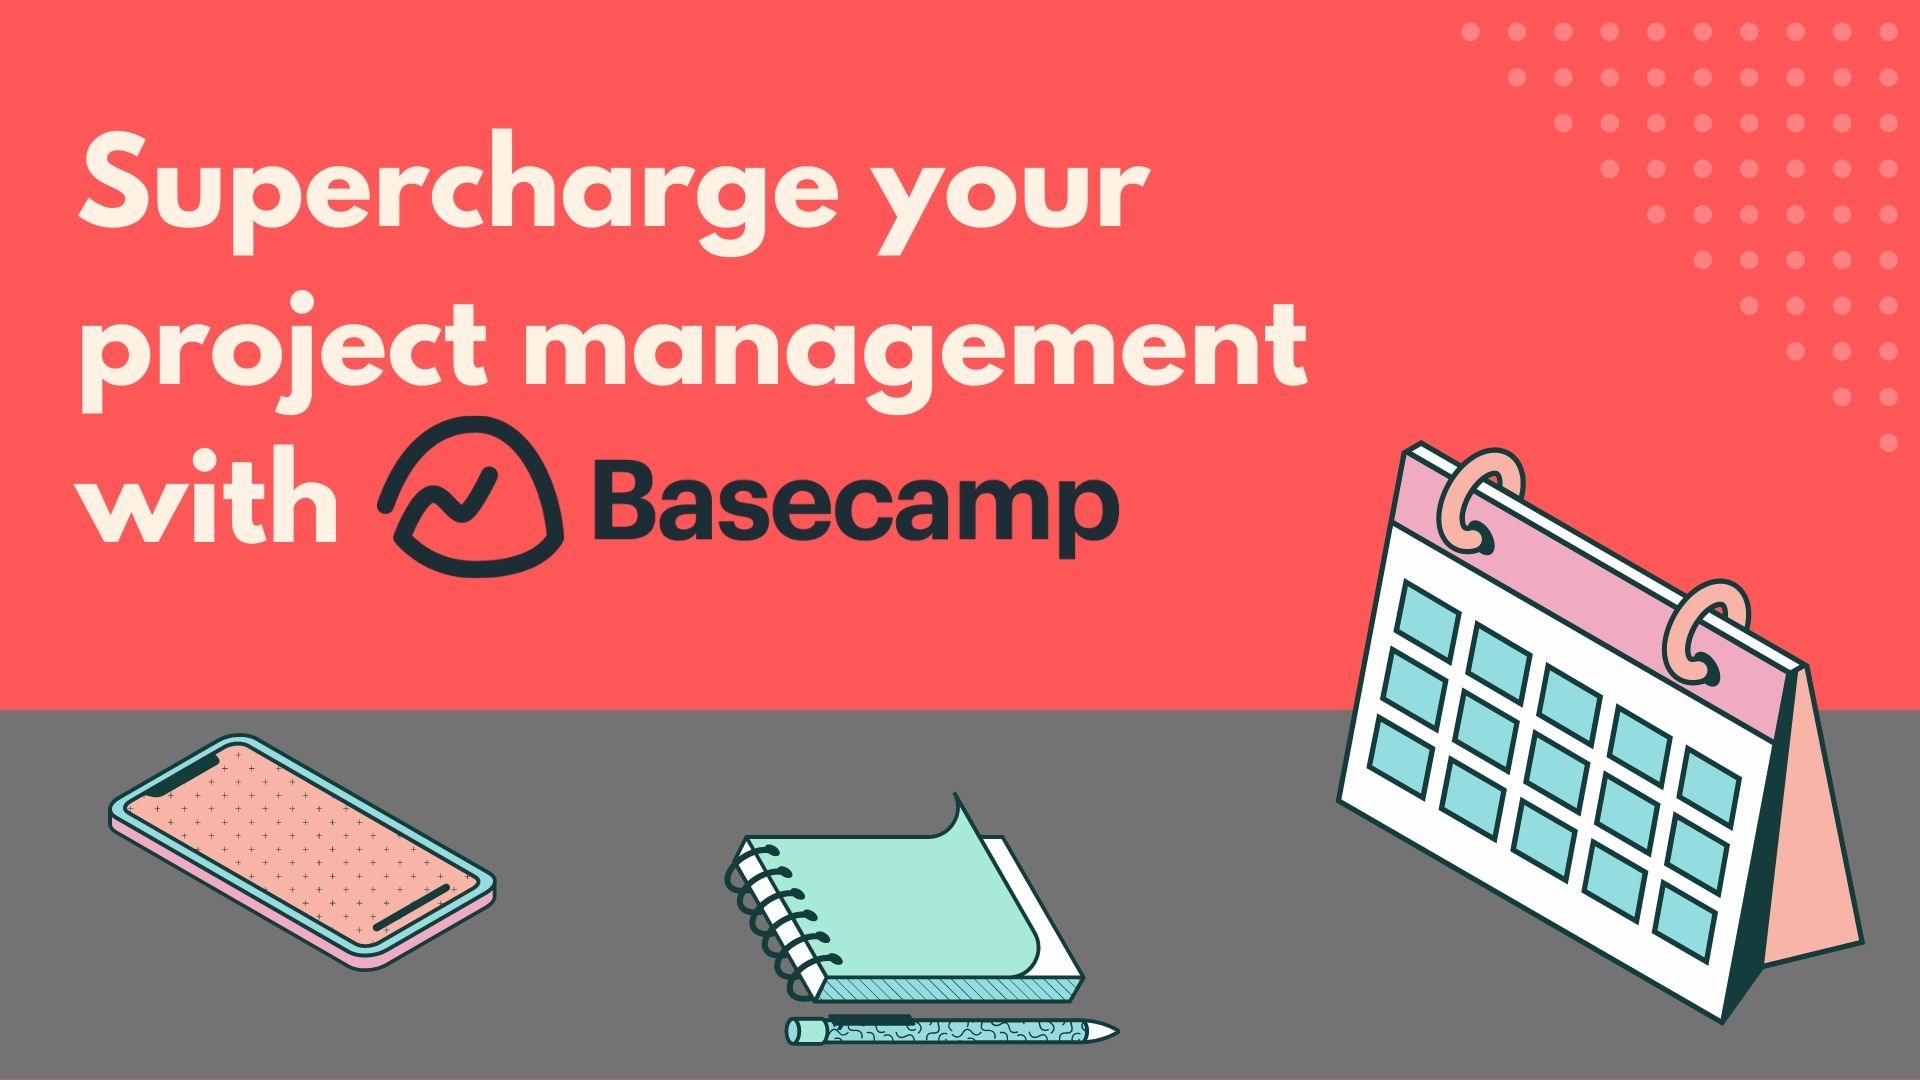 Supercharge your project management with Basecamp